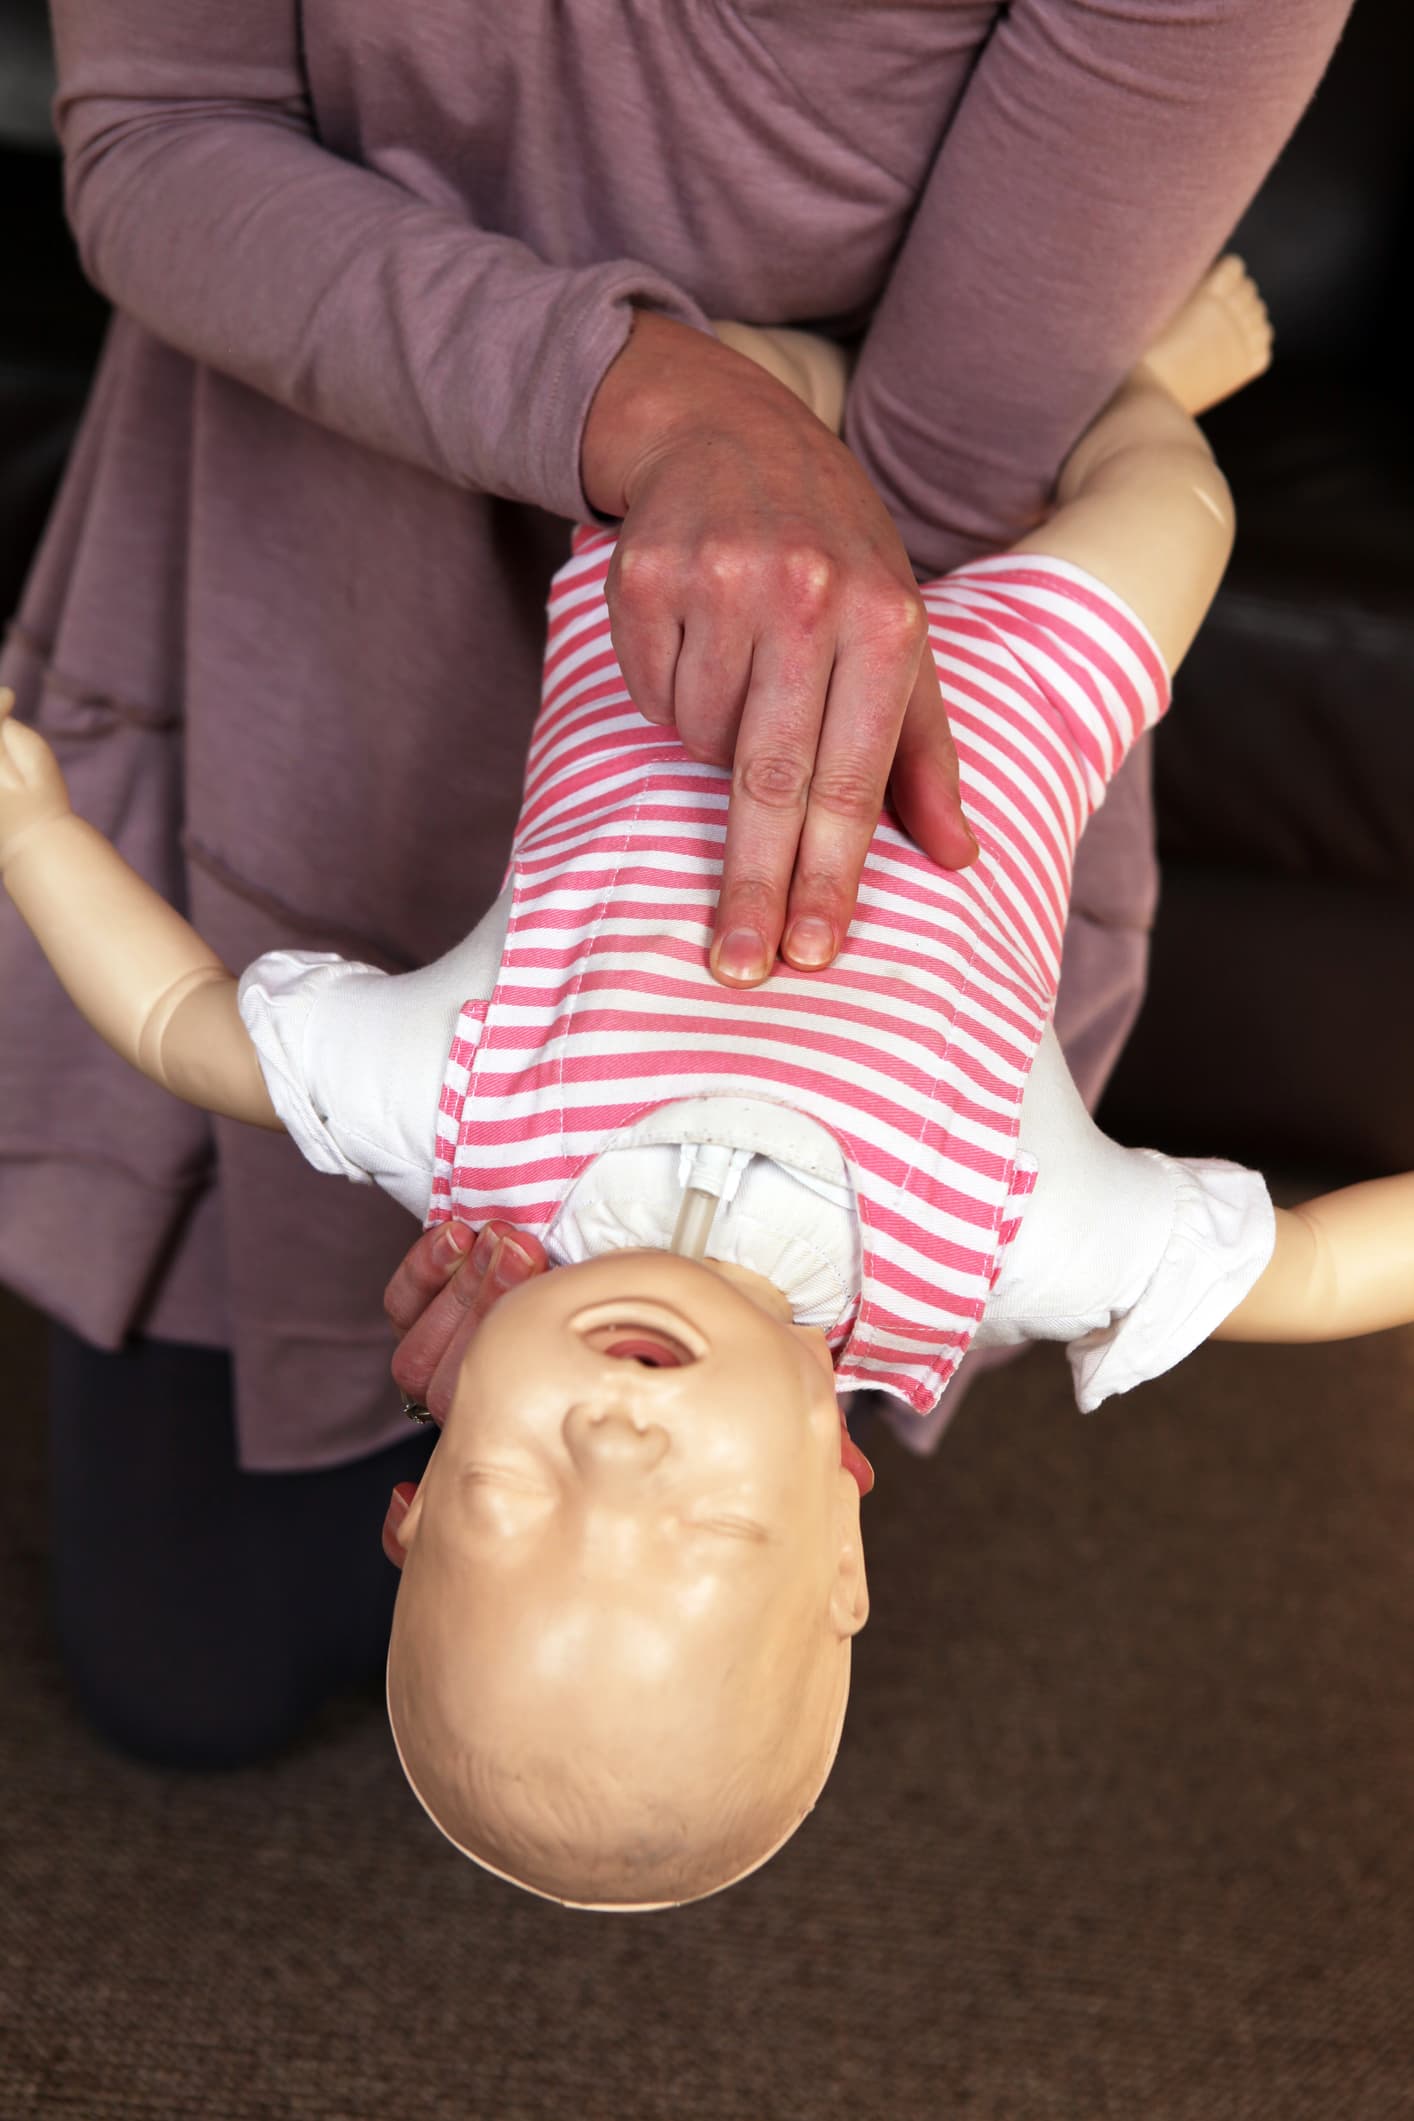 Infant choking training, showing where to push and to hold the baby when choking.